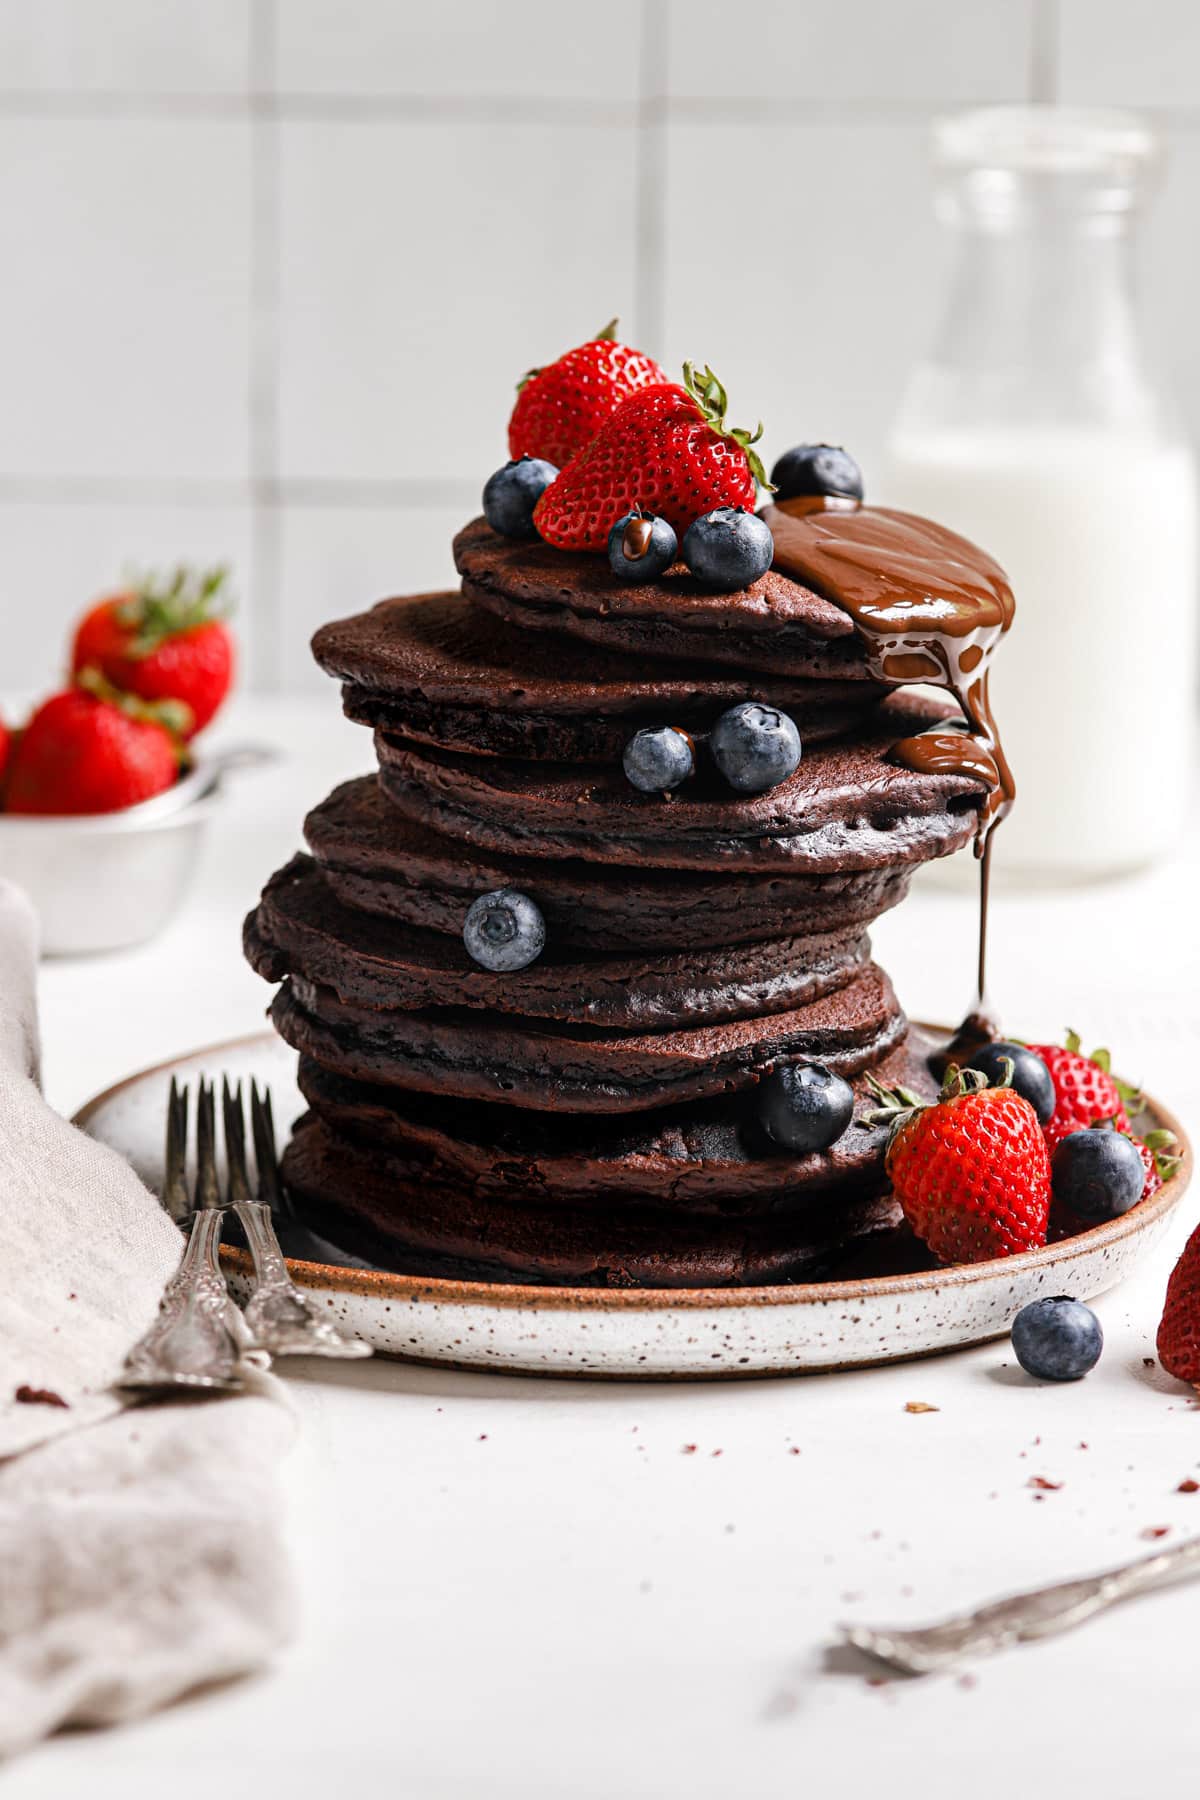 Chocolate Pancakes topped with berries and chocolate.